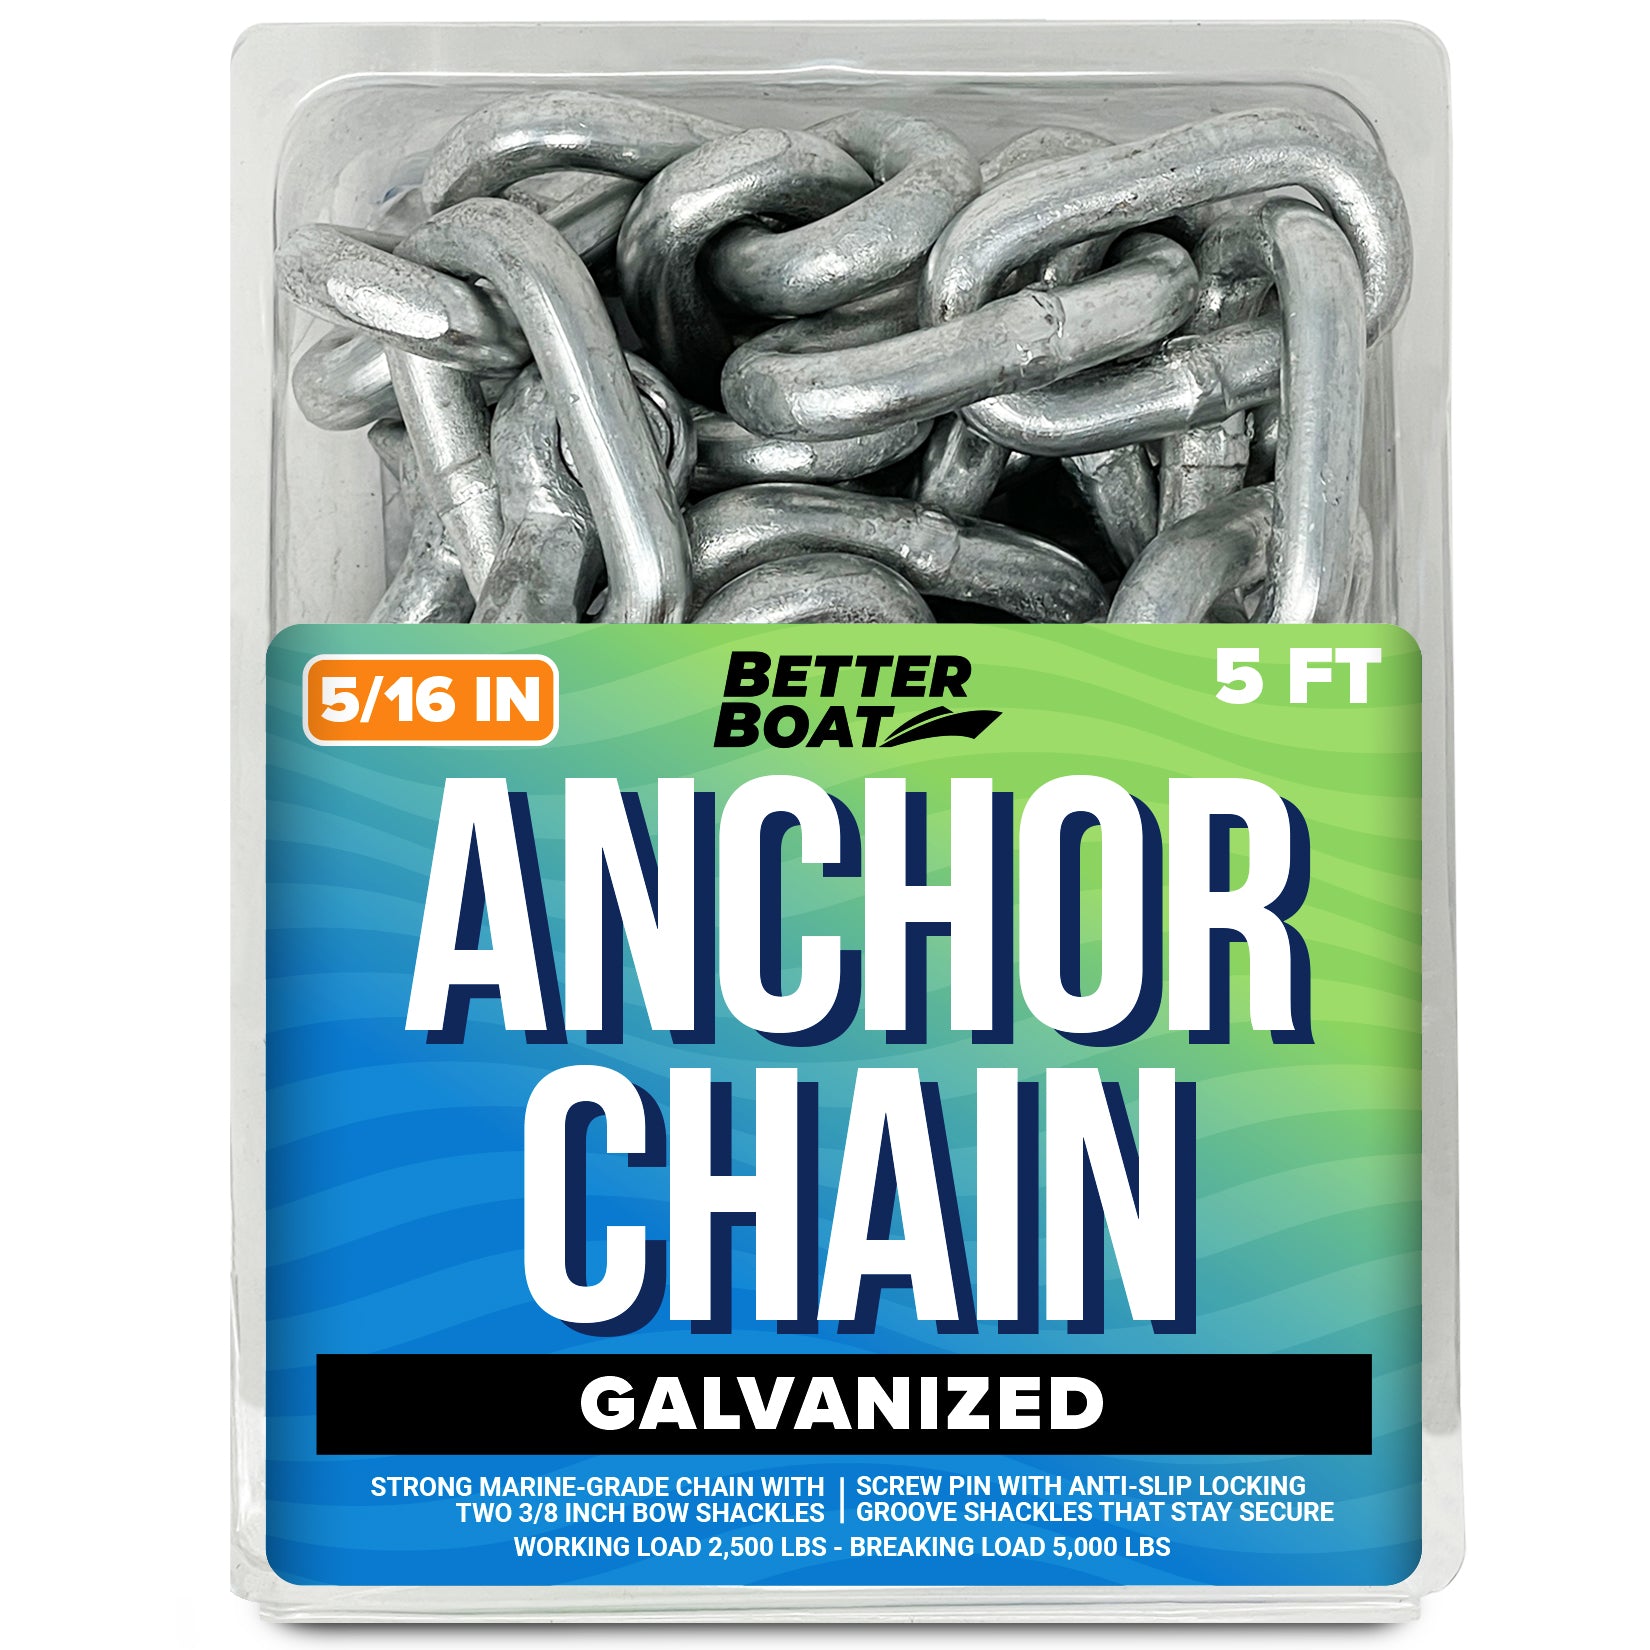 Anchor Chain Stainless Steel Anchor Chain or Galvanized Boat Anchor Chain, Anchor Chains for Boats, Stainless Anchor Chain, Double Boat Anchor